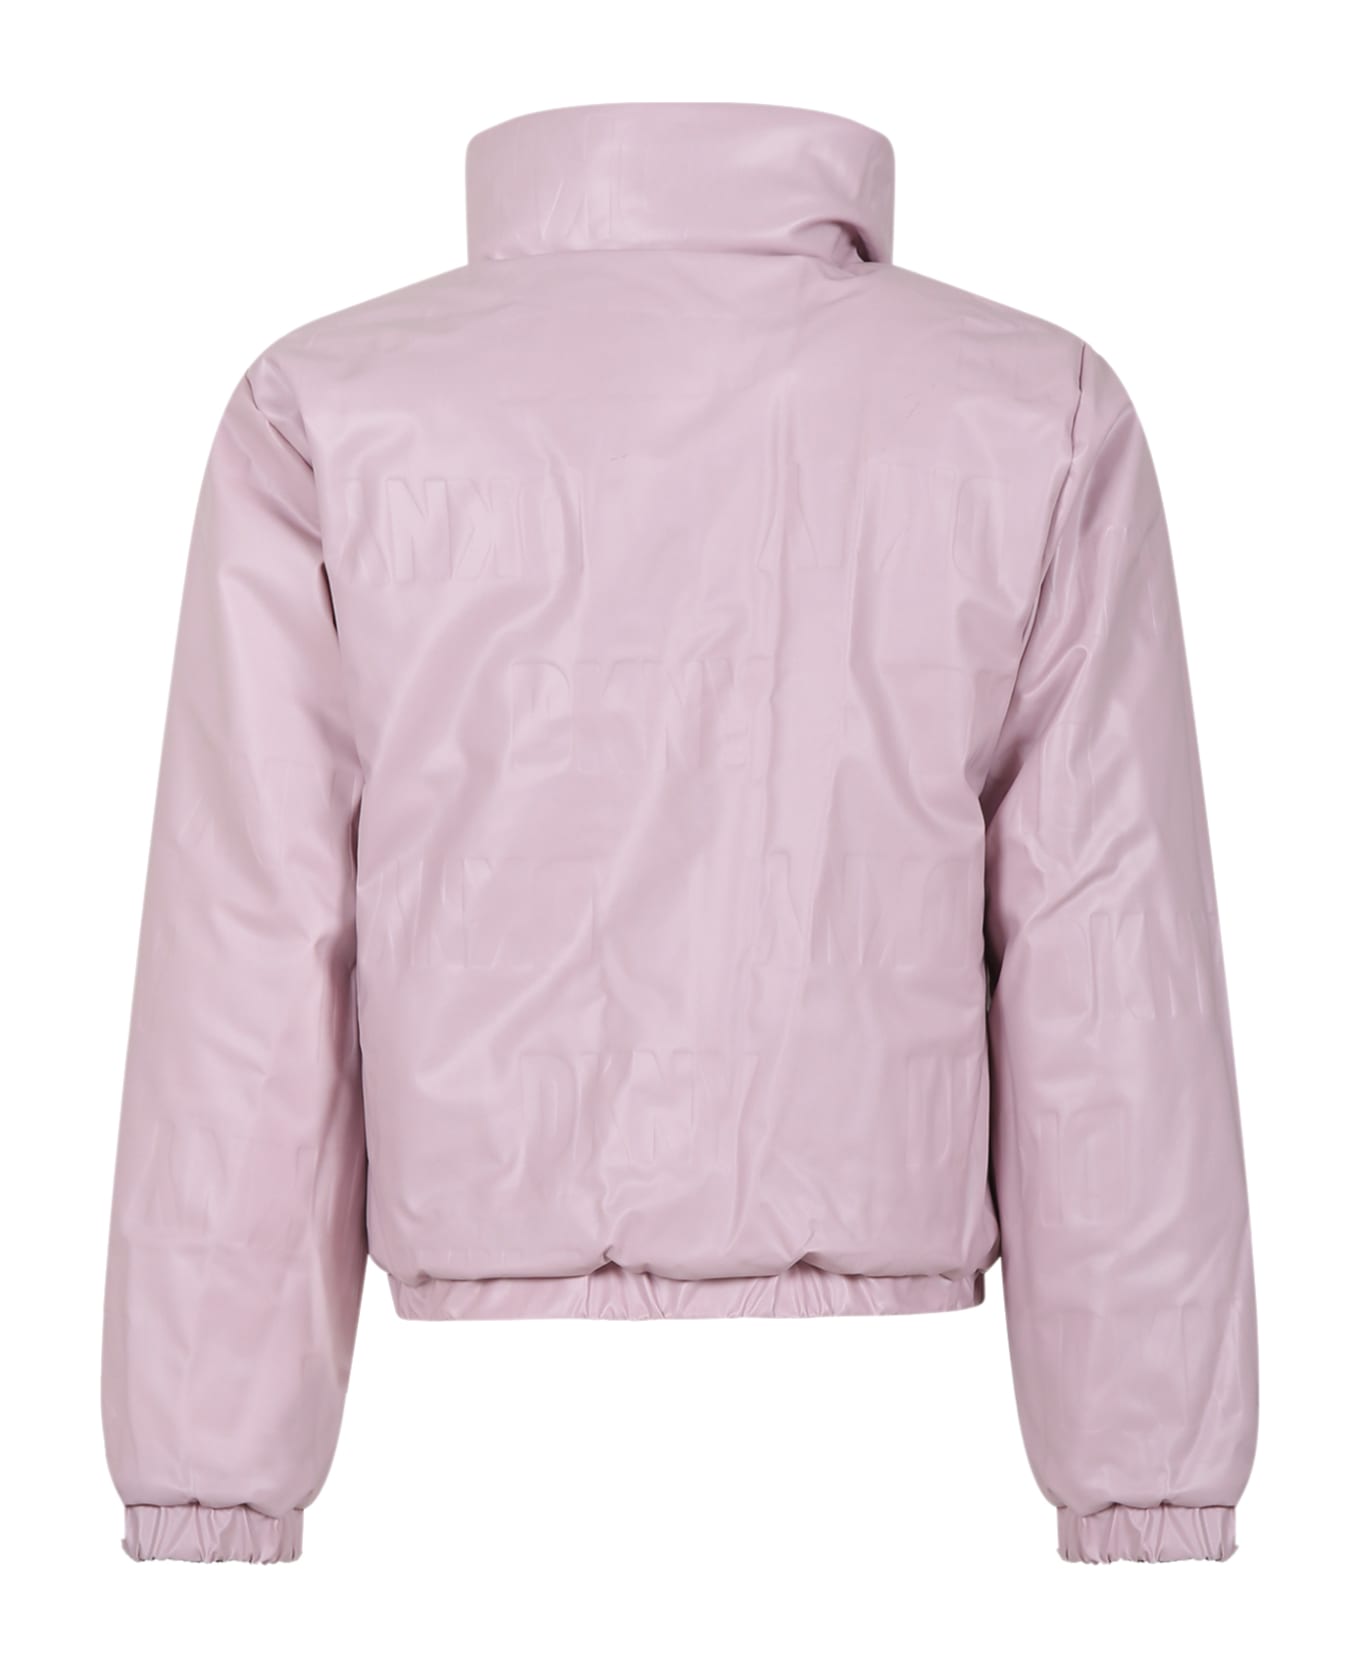 DKNY Reversible Purple Jacket For Girl With Logo - Pink